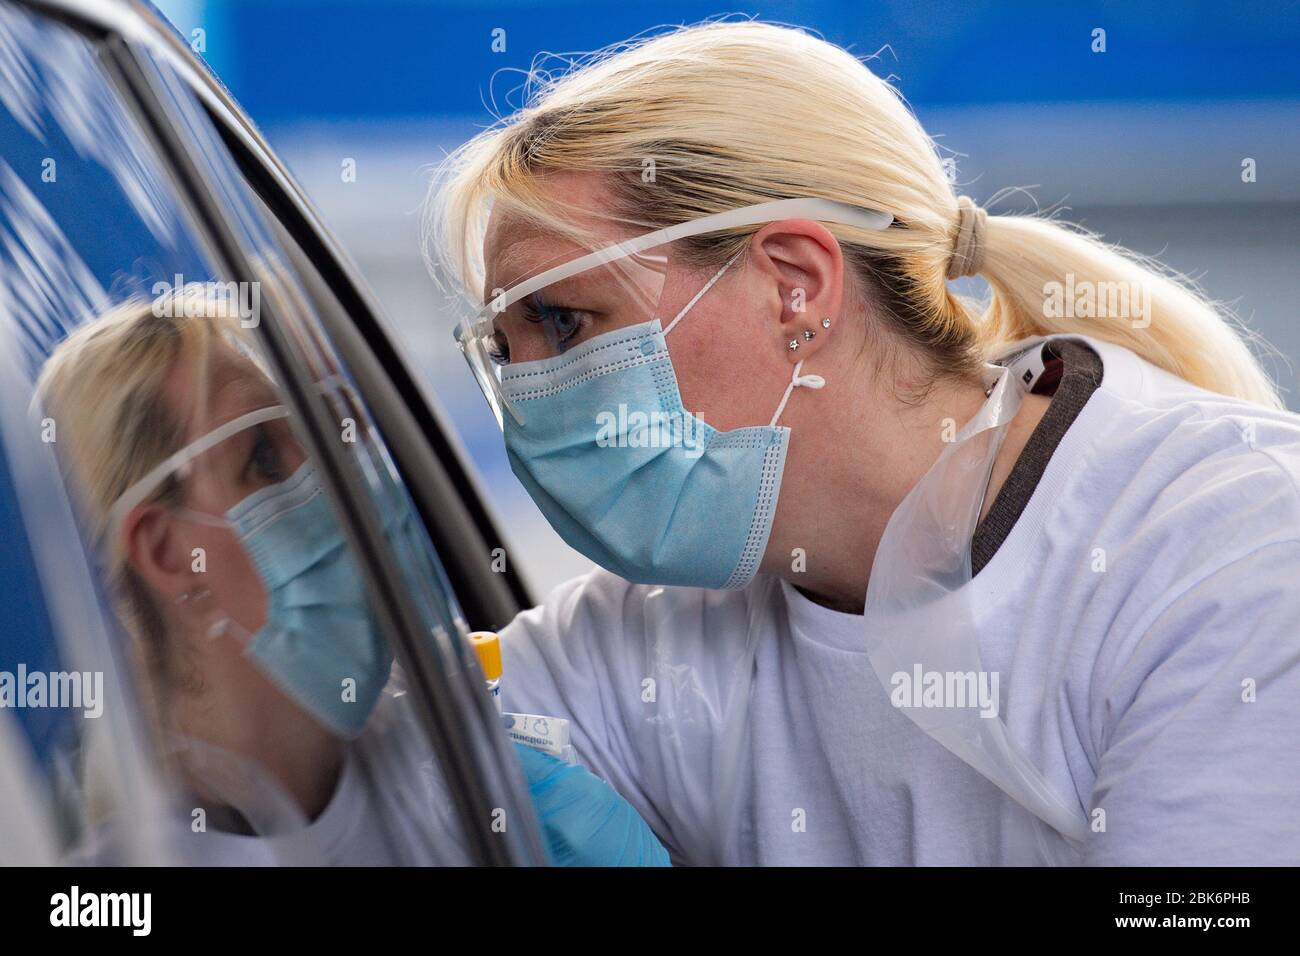 A person is tested for coronavirus at the drive through facility at the Edgbaston Cricket Ground Covid-19 testing site in Birmingham. Stock Photo